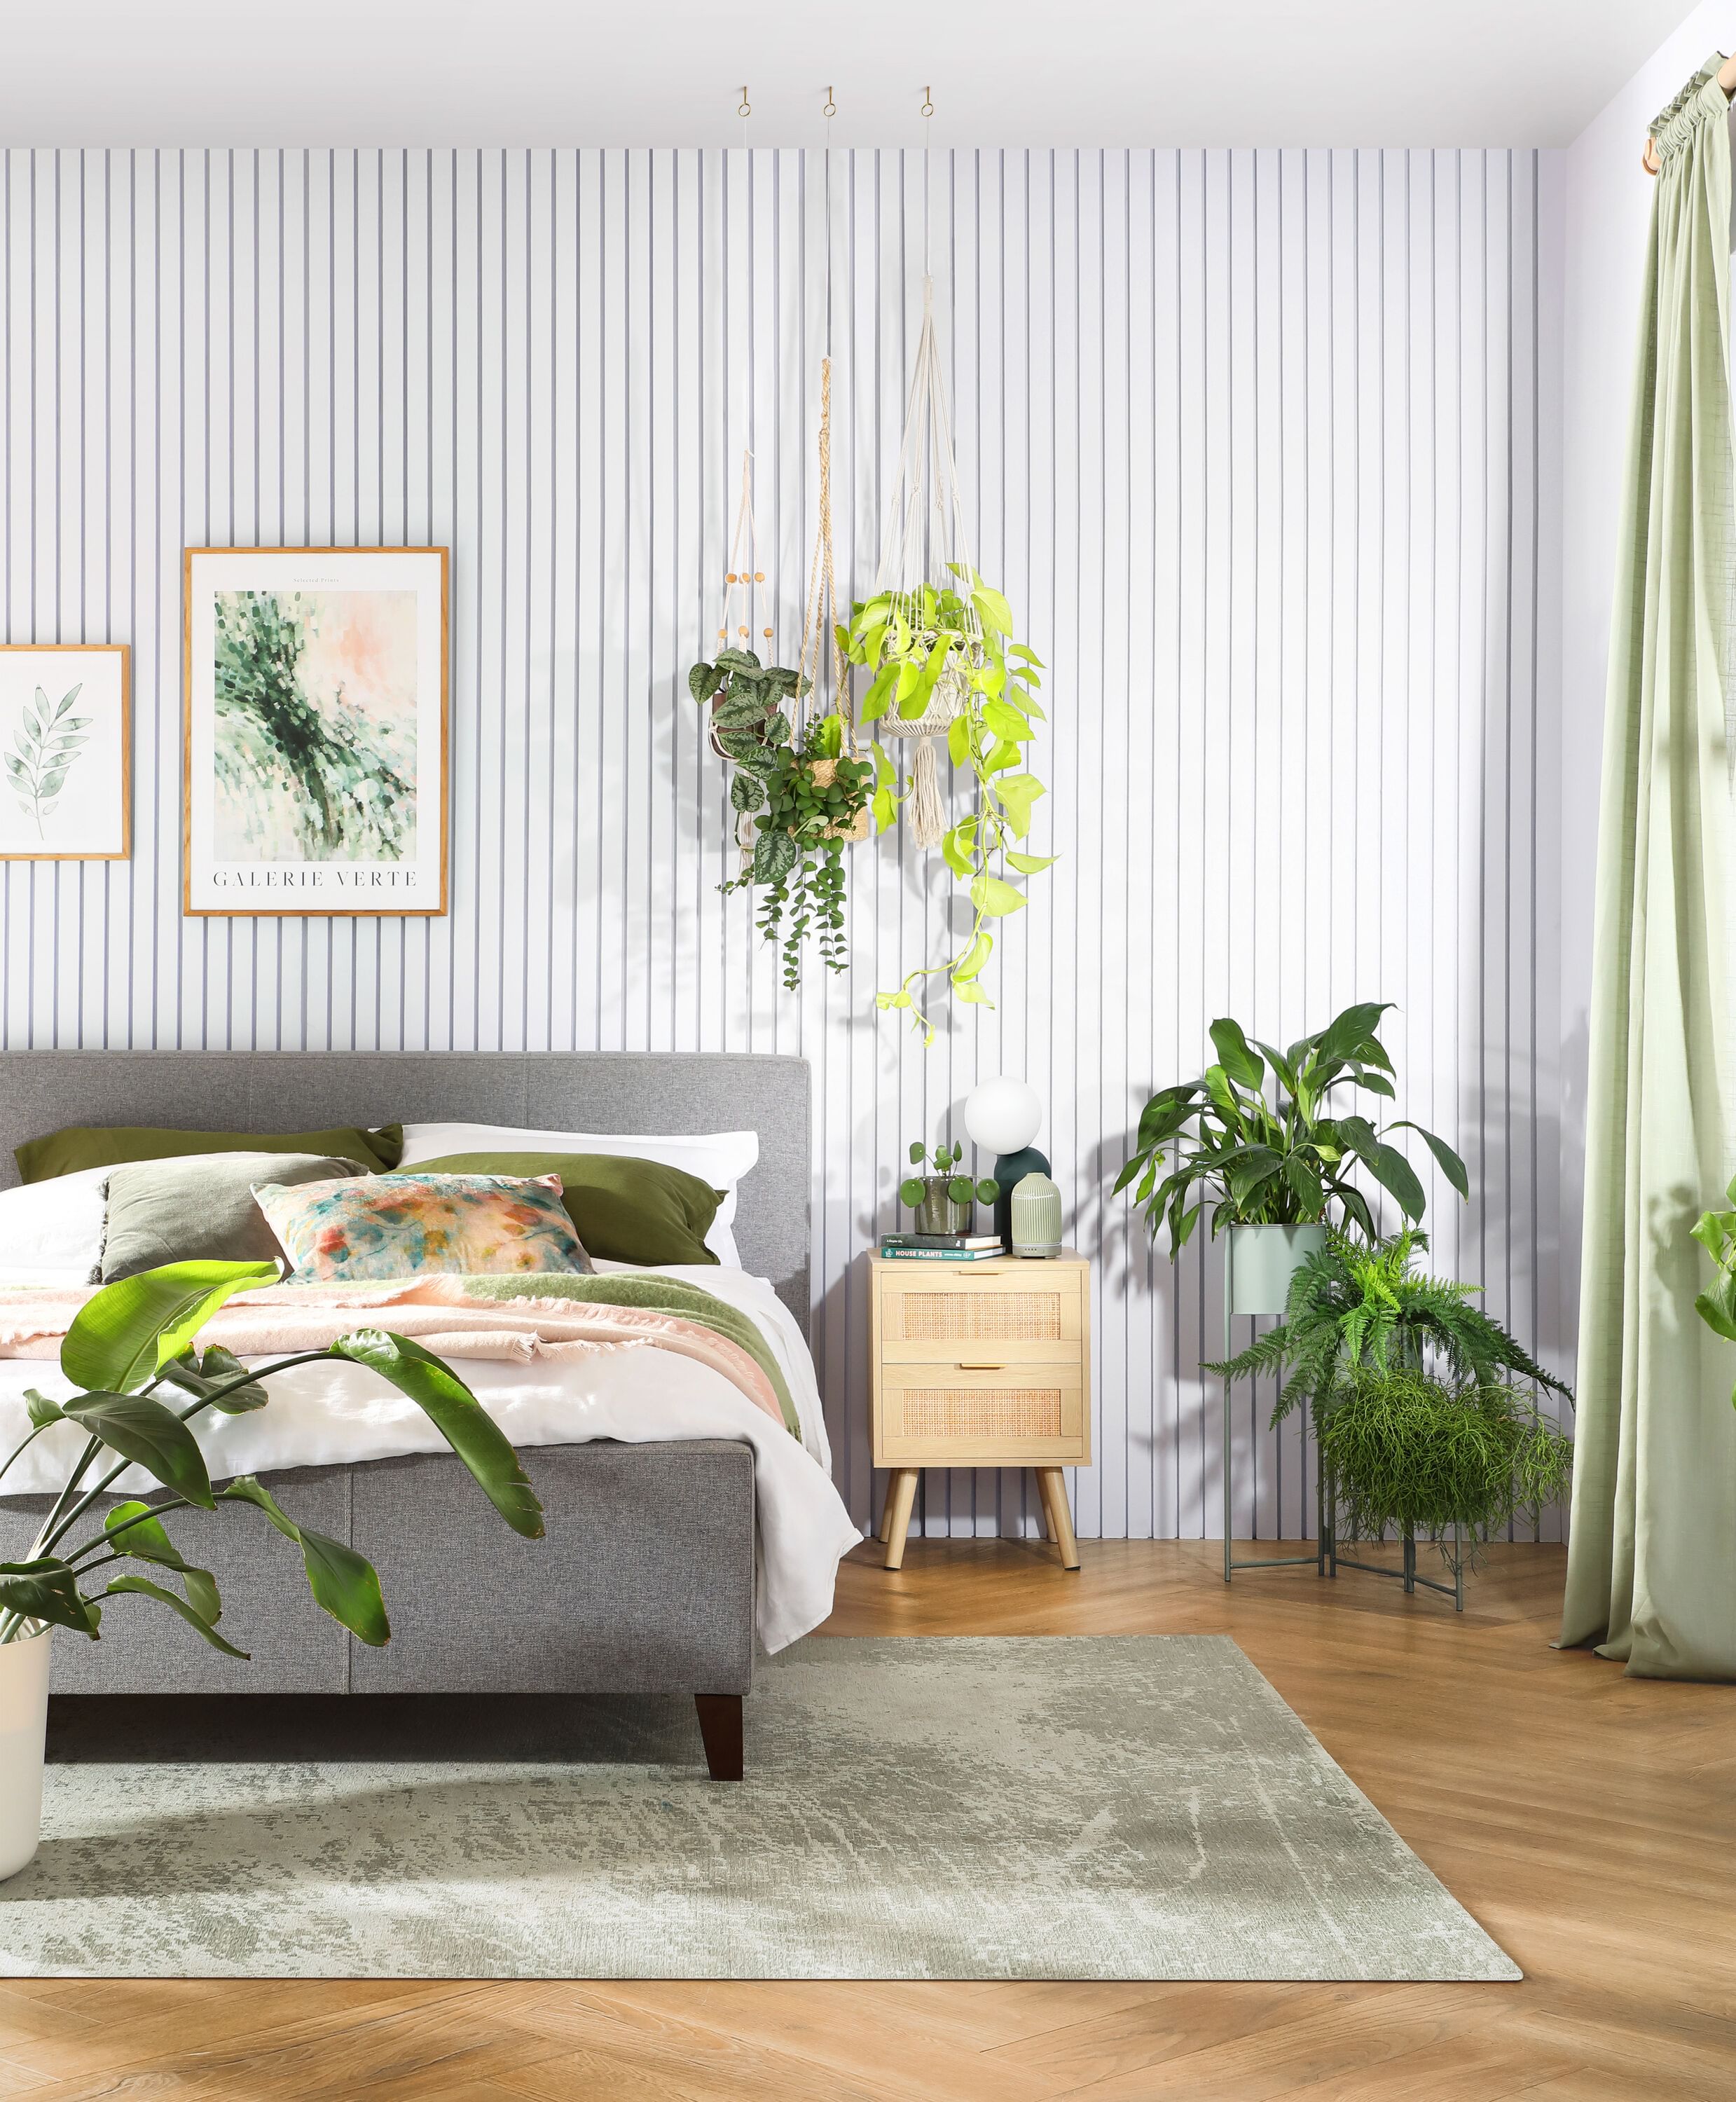 Floor to ceiling wood slats painted white in a nature inspired bedroom